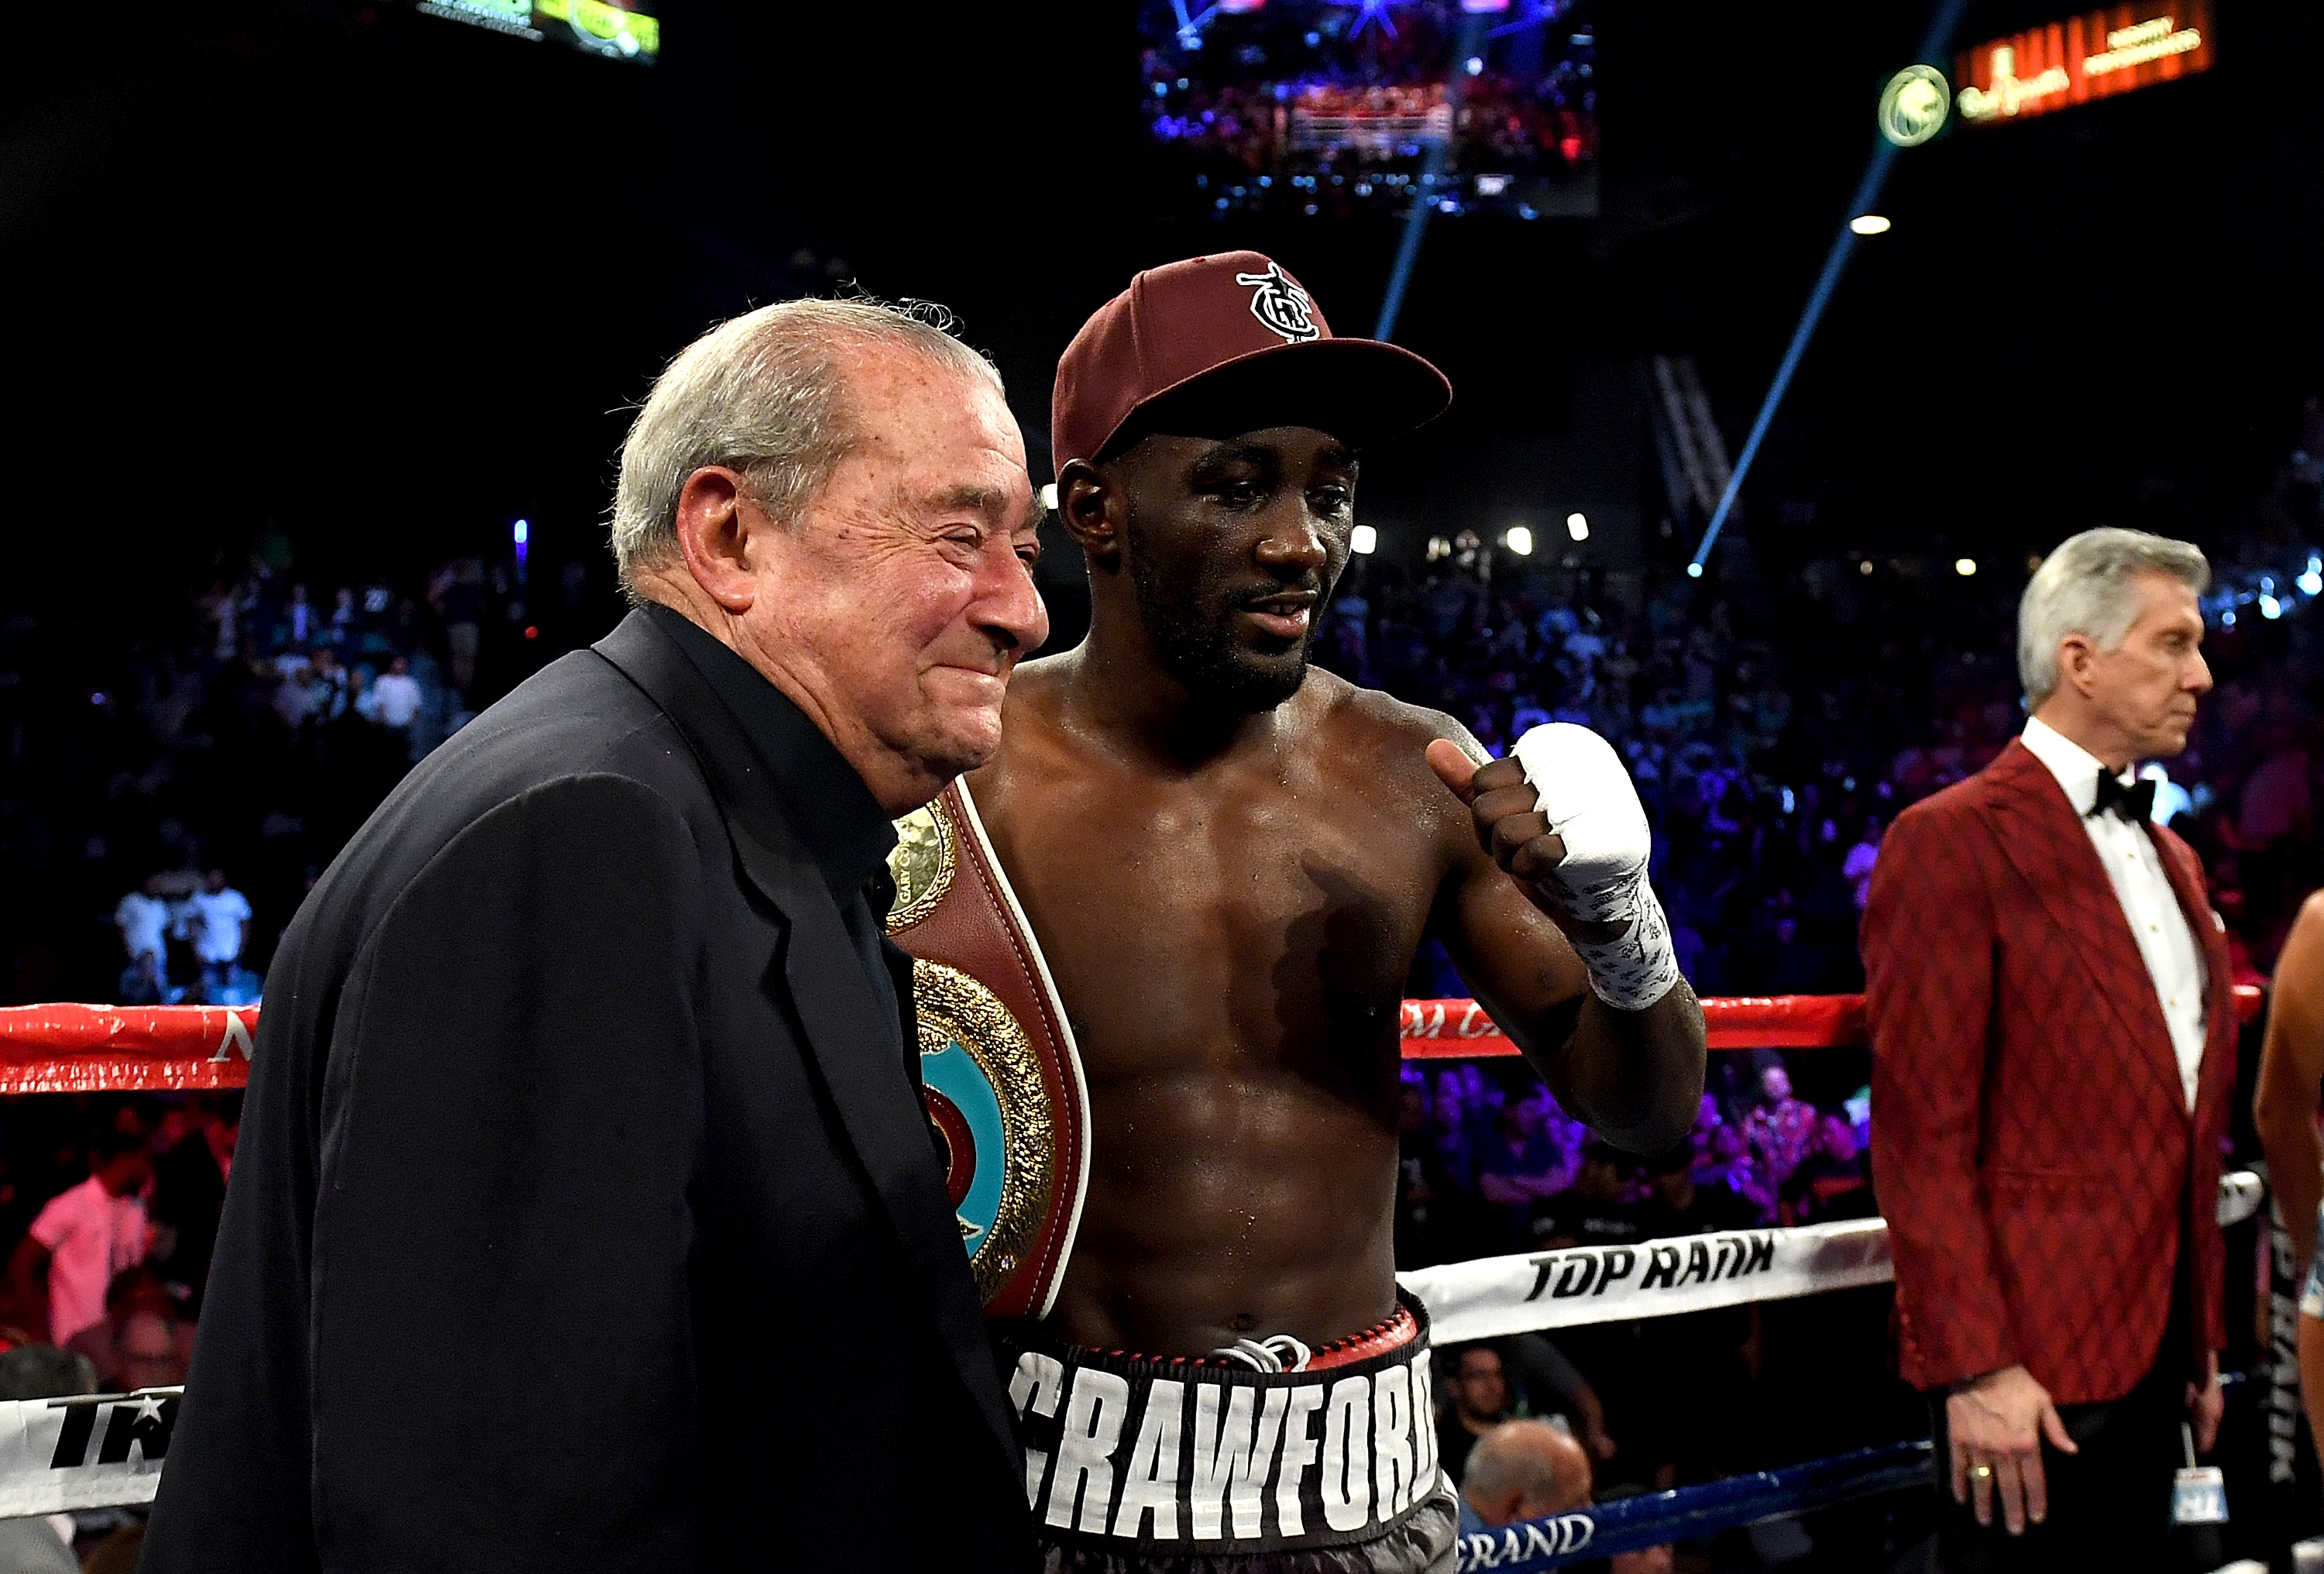 Bob Arum doesn’t think Terence Crawford has the size to challenge Canelo Alvarez